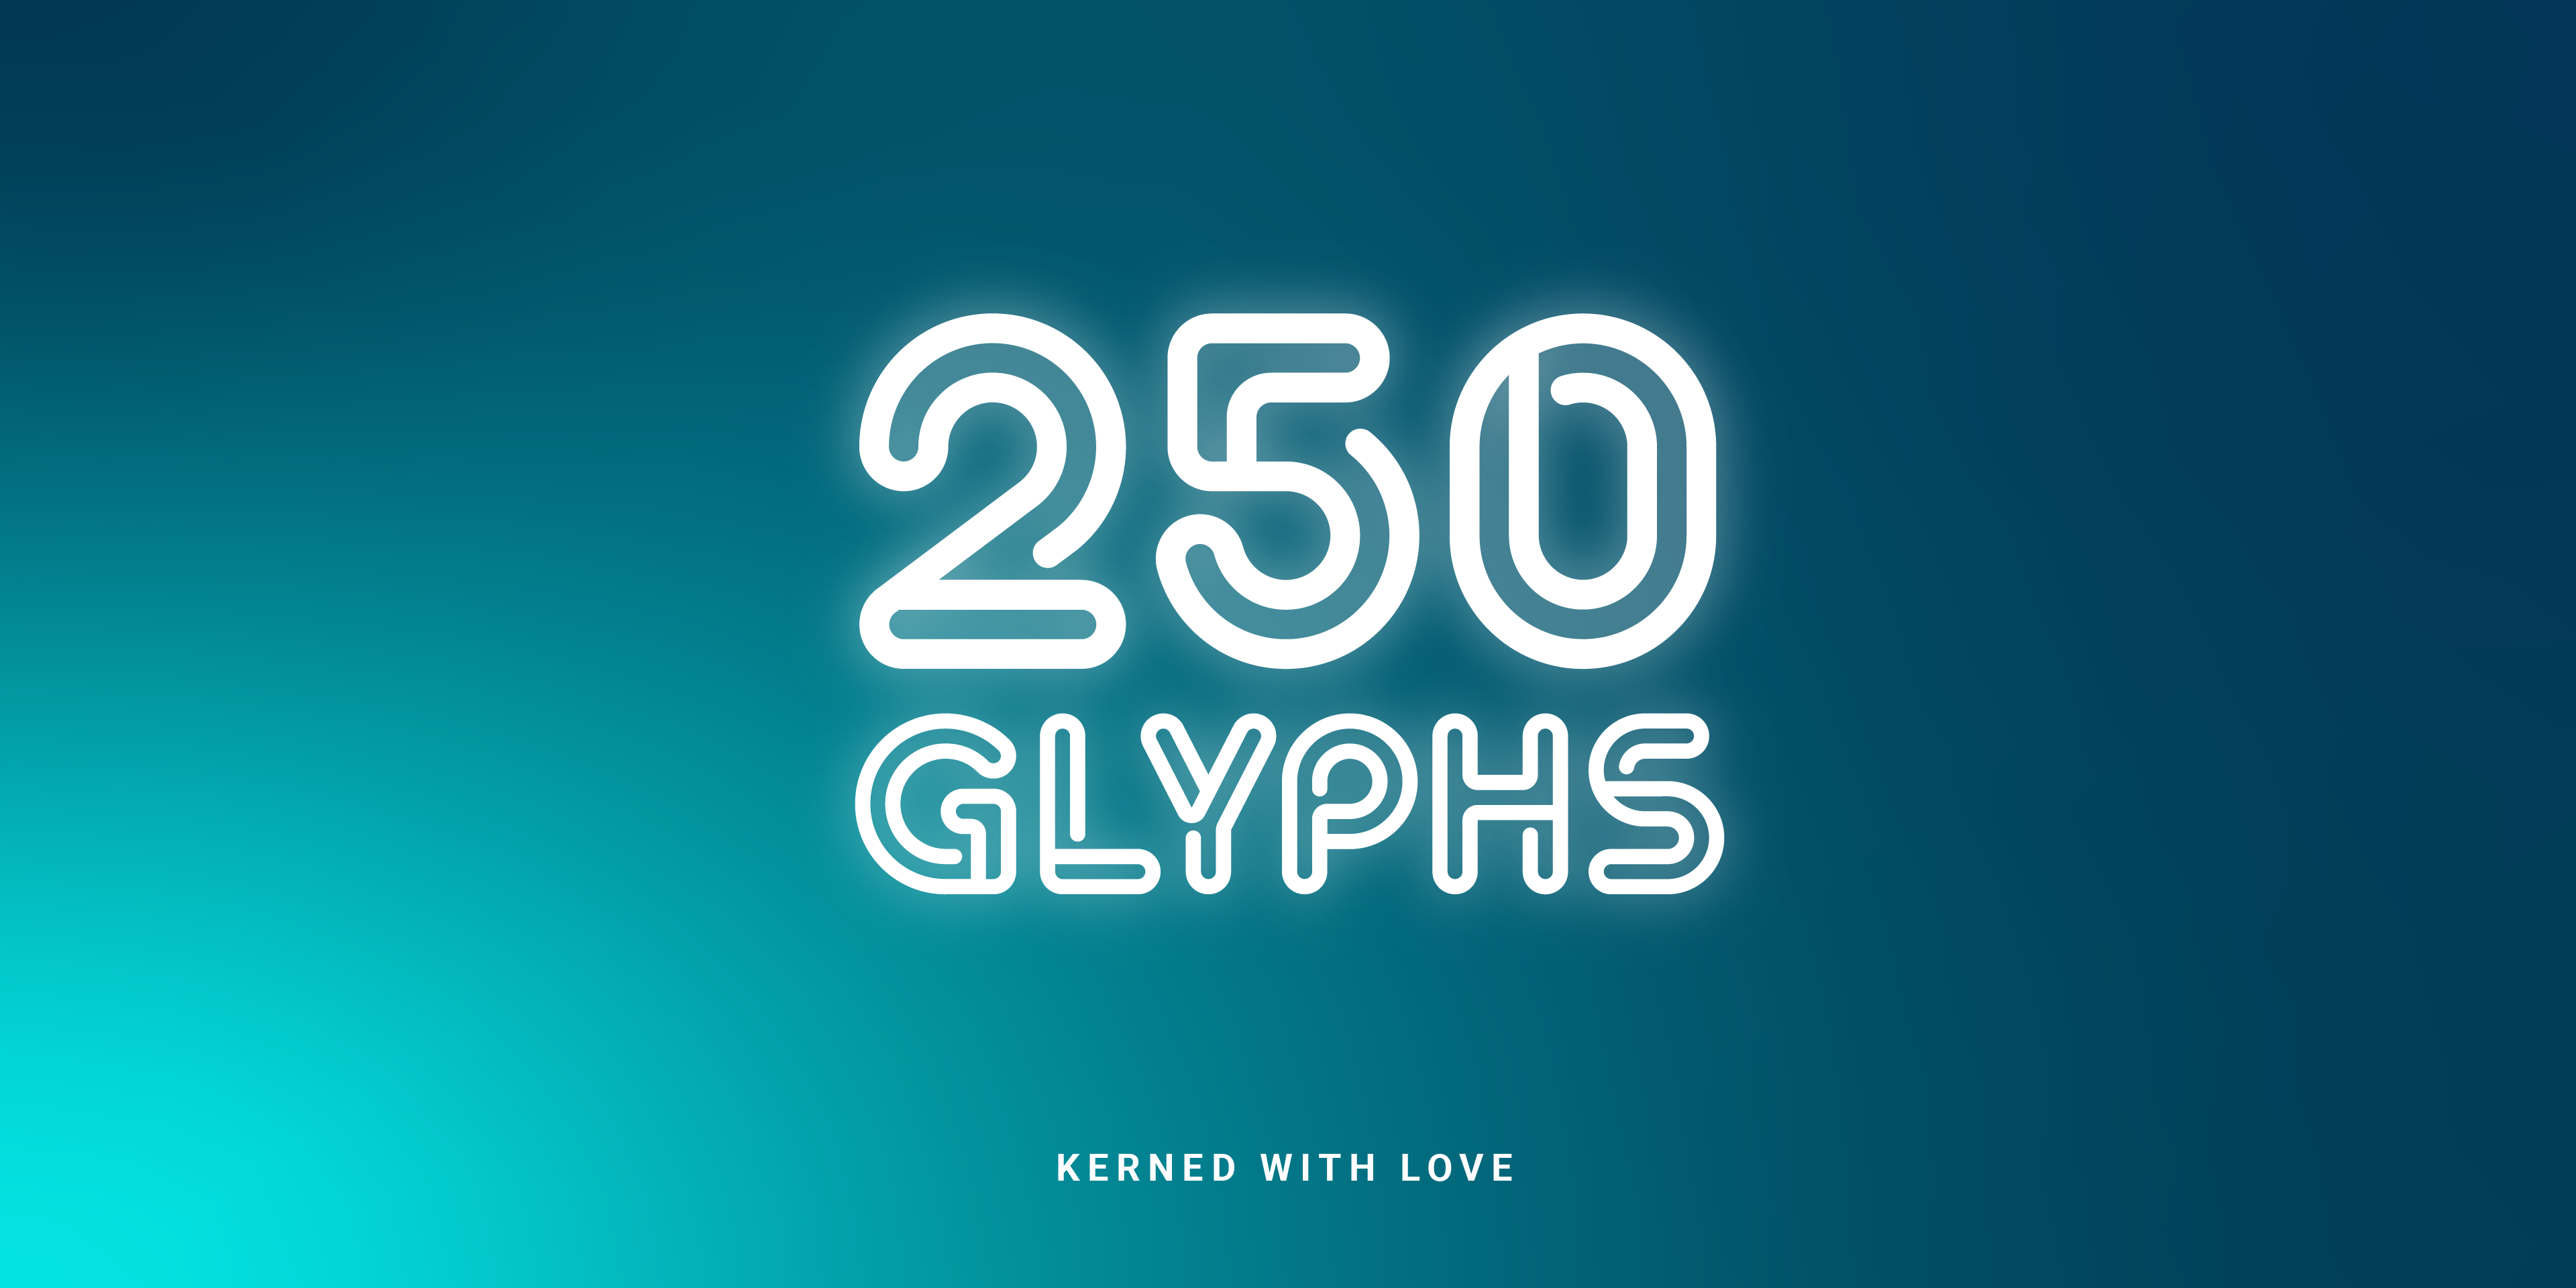 Colorful image with white neon letters saying '250 glypgs kerned with love'